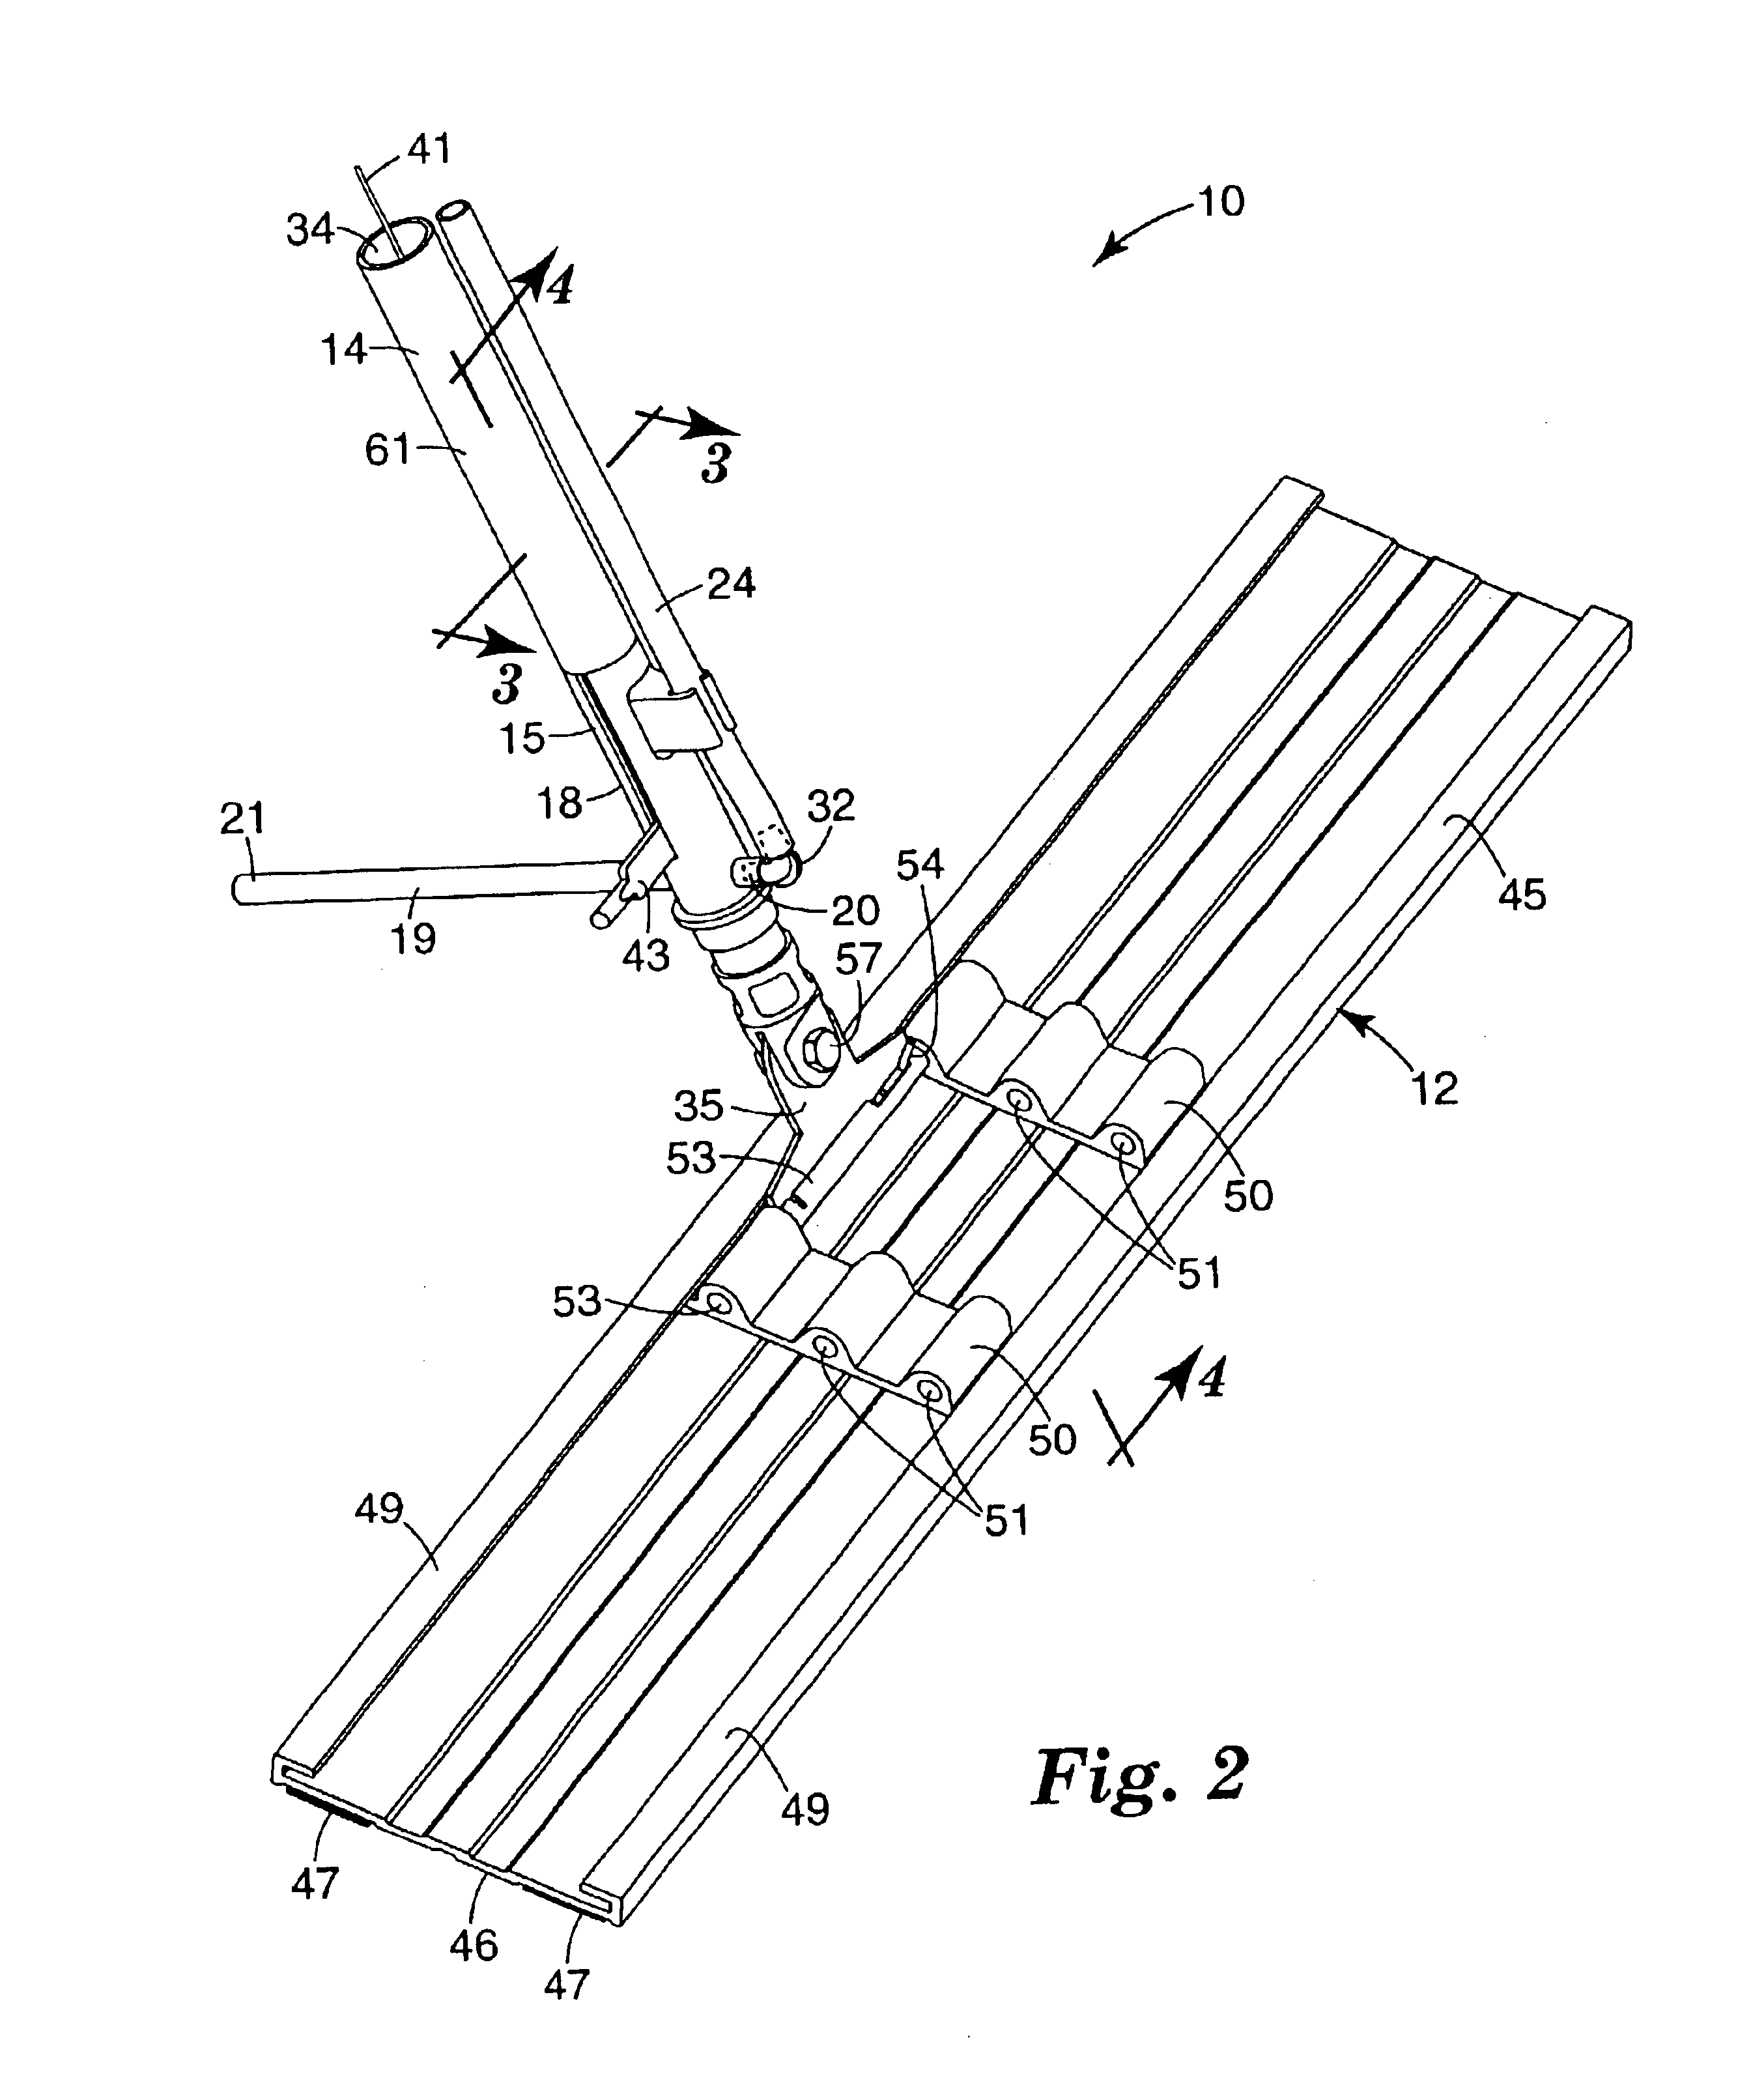 Mop assembly and cart